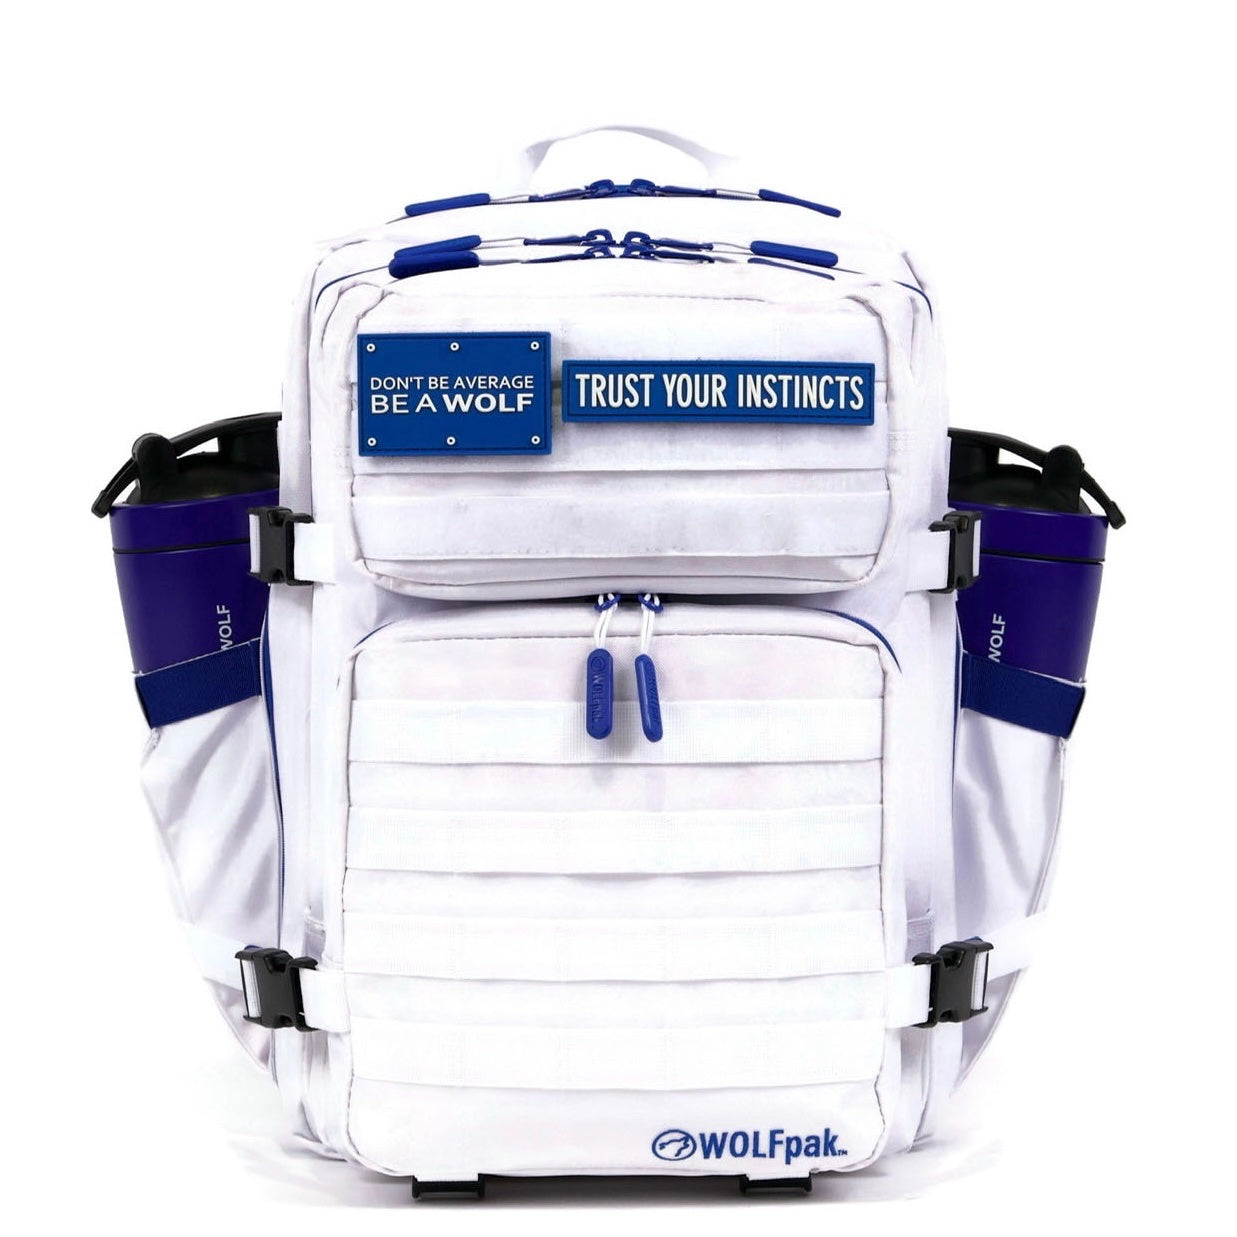 35L Backpack Polar White Blue Accents